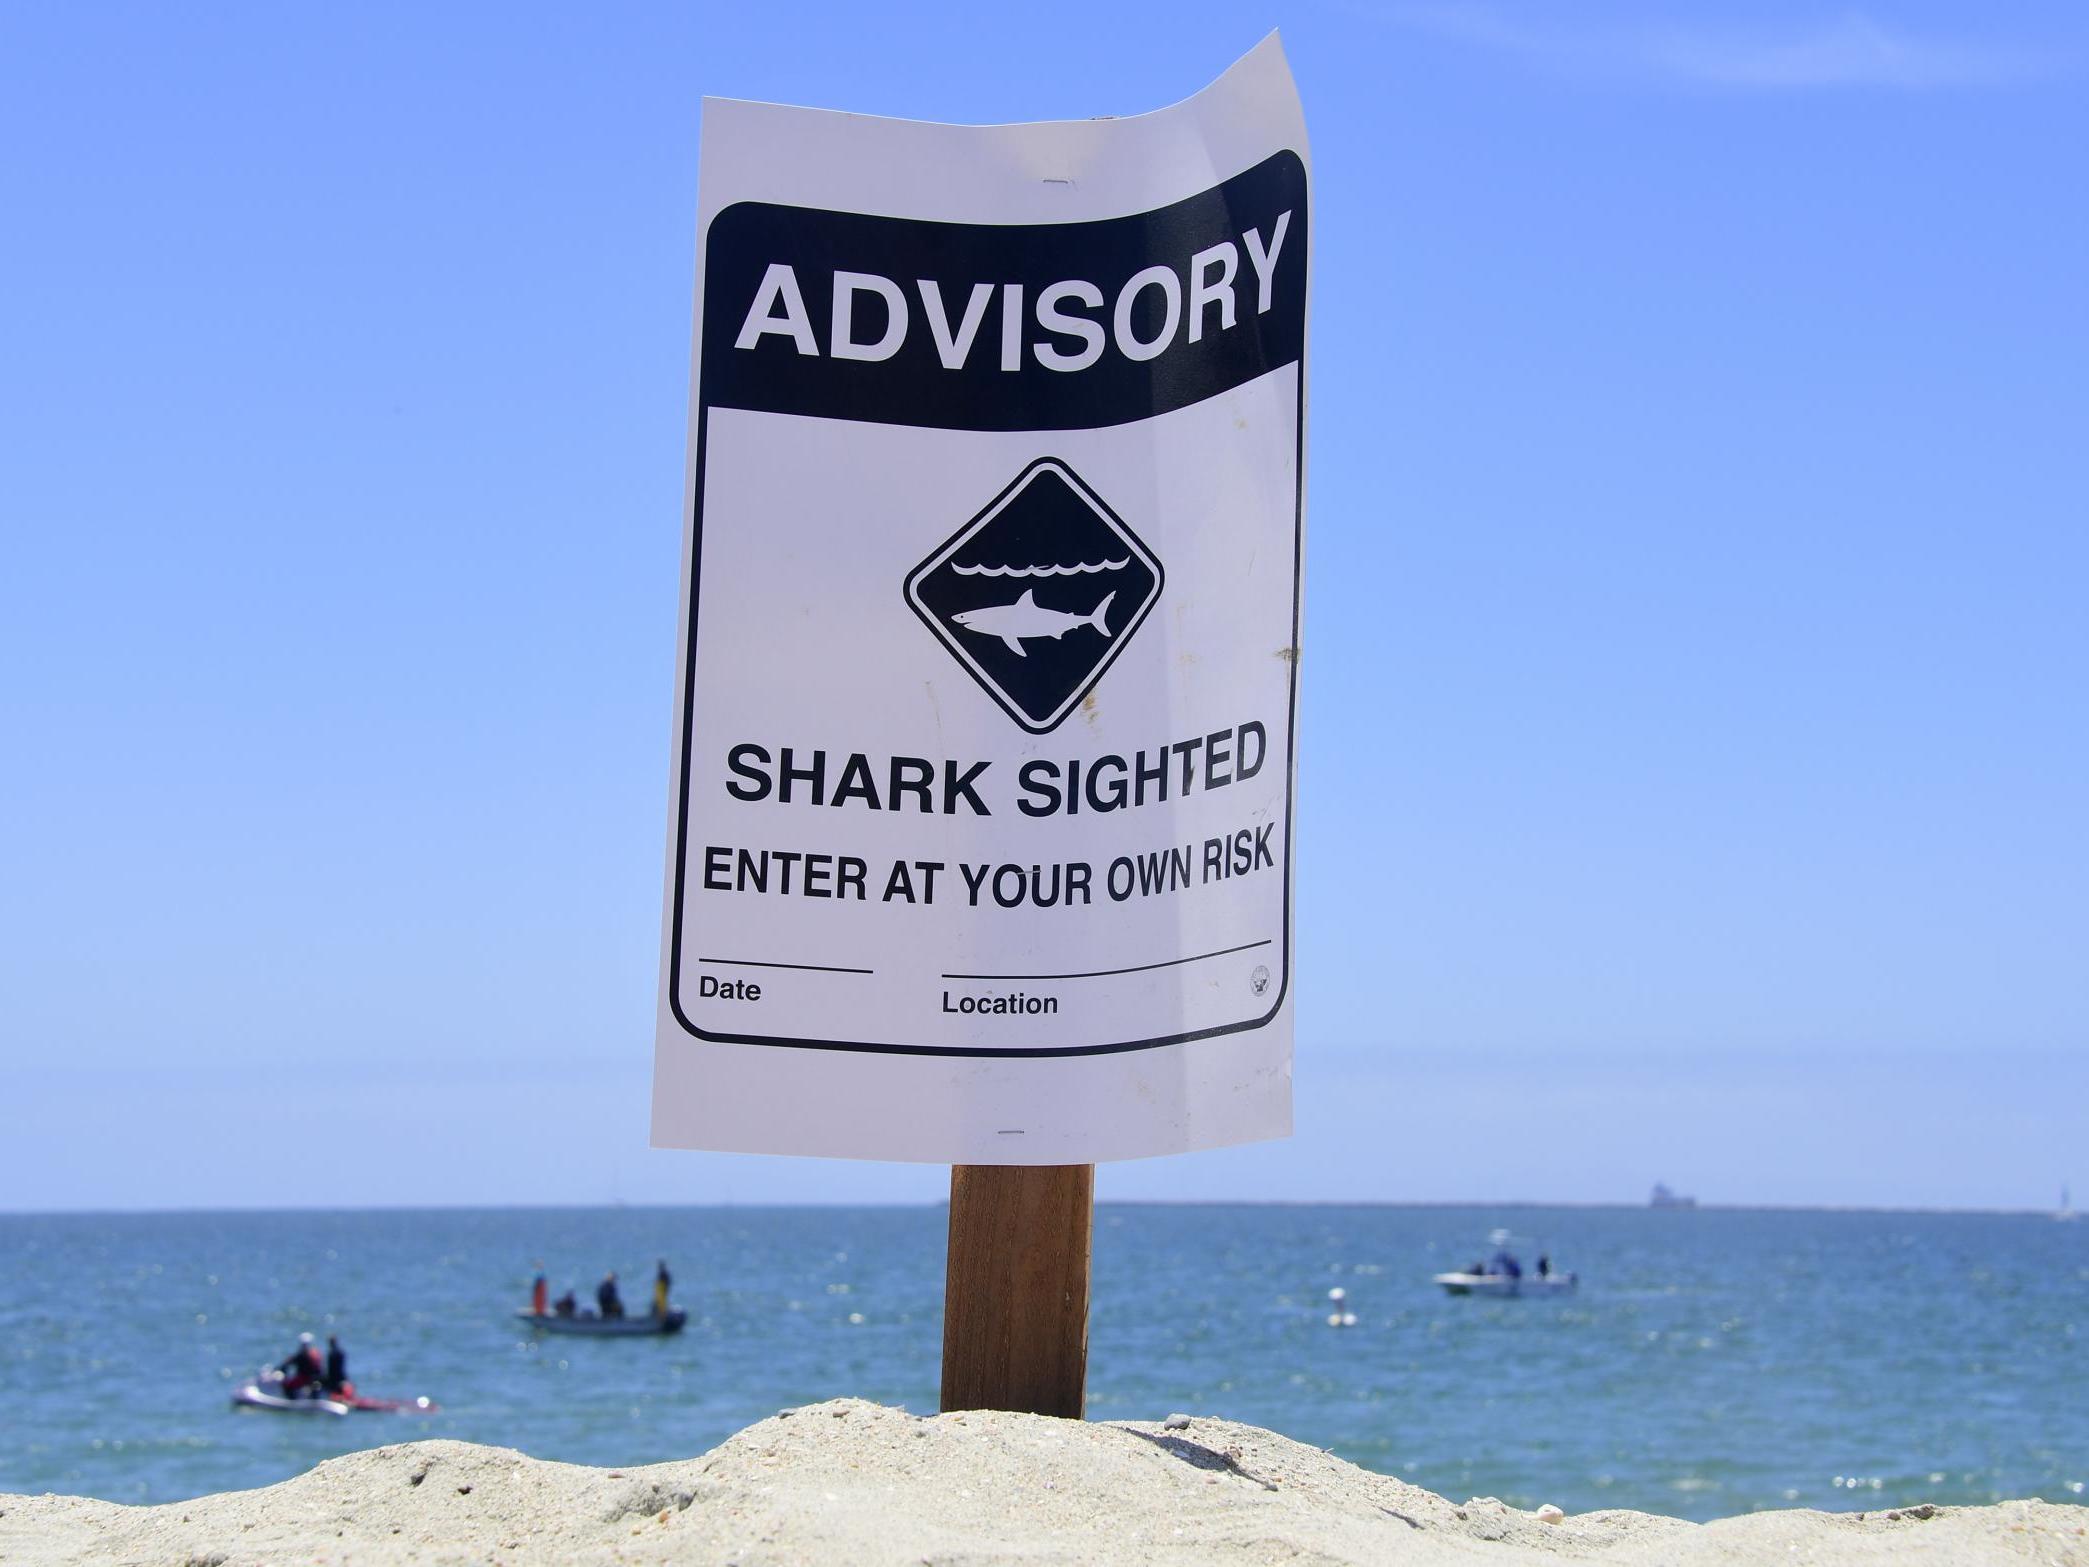 Ben Kelly died at the scene while surfing off Sand Dollar Beach on Saturday (pictured is a California shark advisory in 2017)